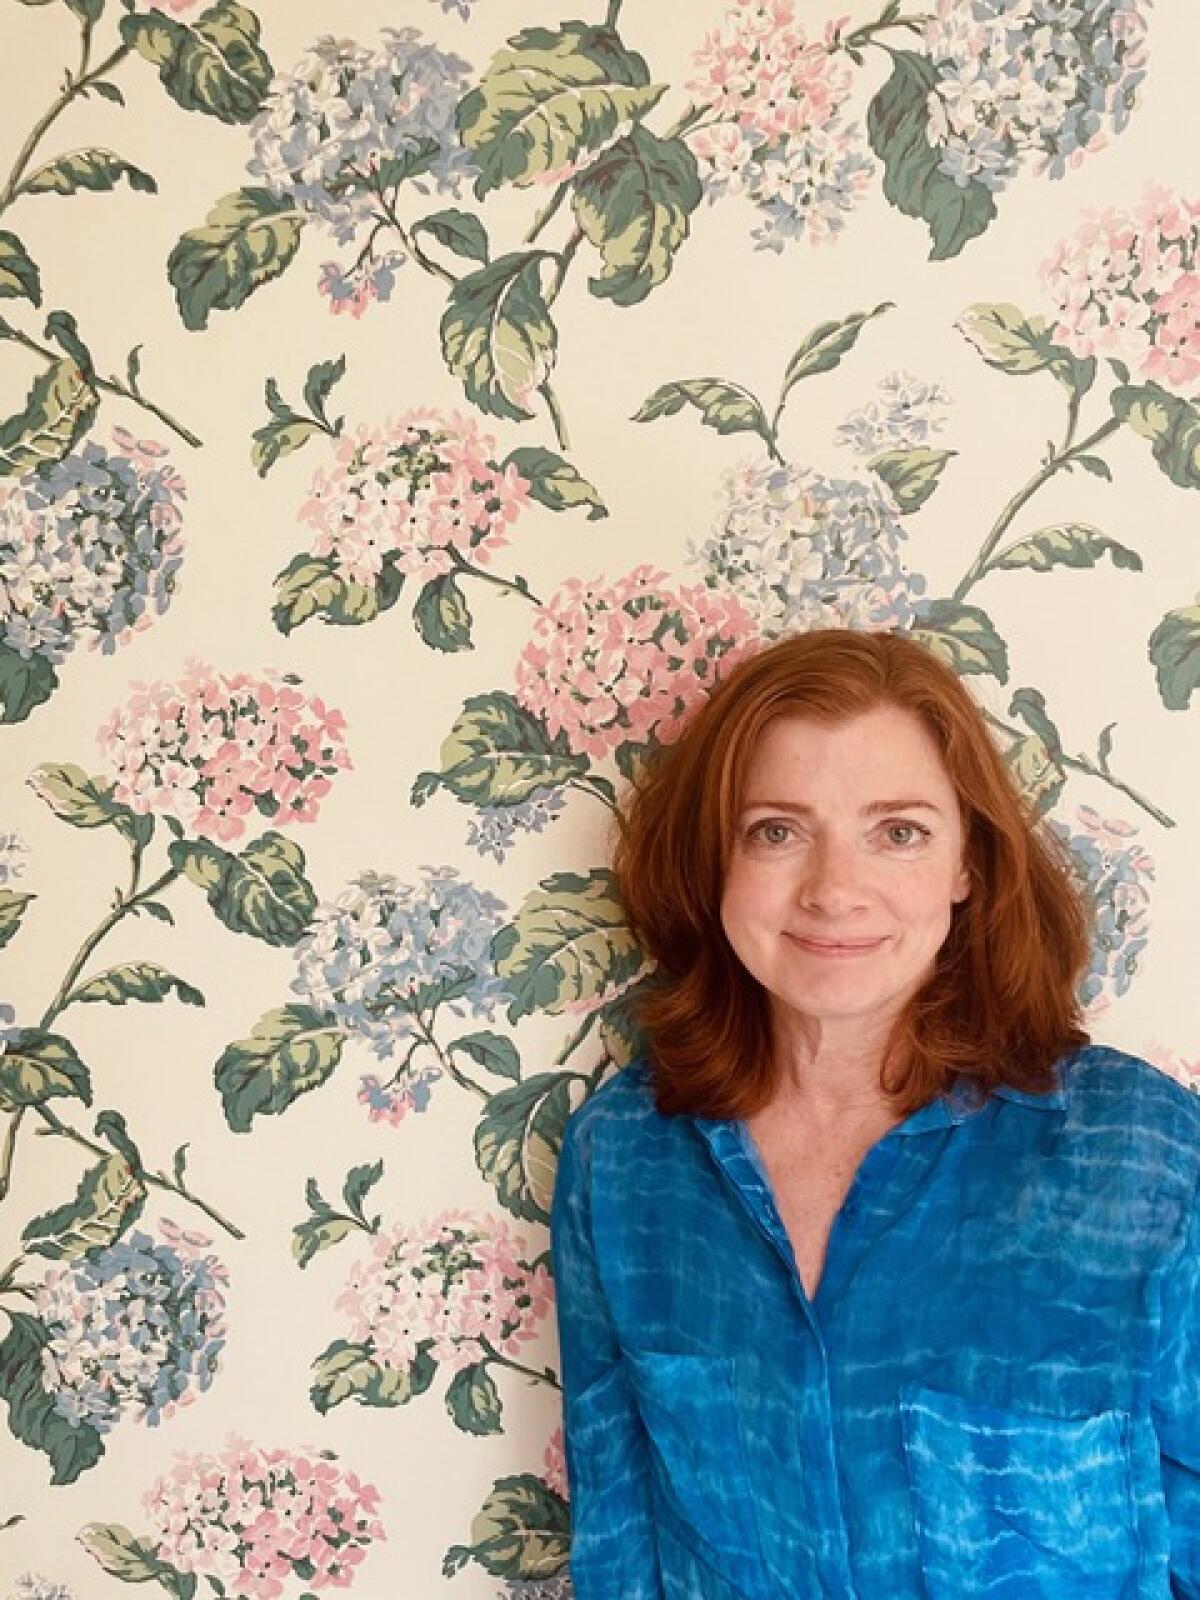 Author Katie Crouch wears a blue shirt and stands before a wall with floral wallpaper.